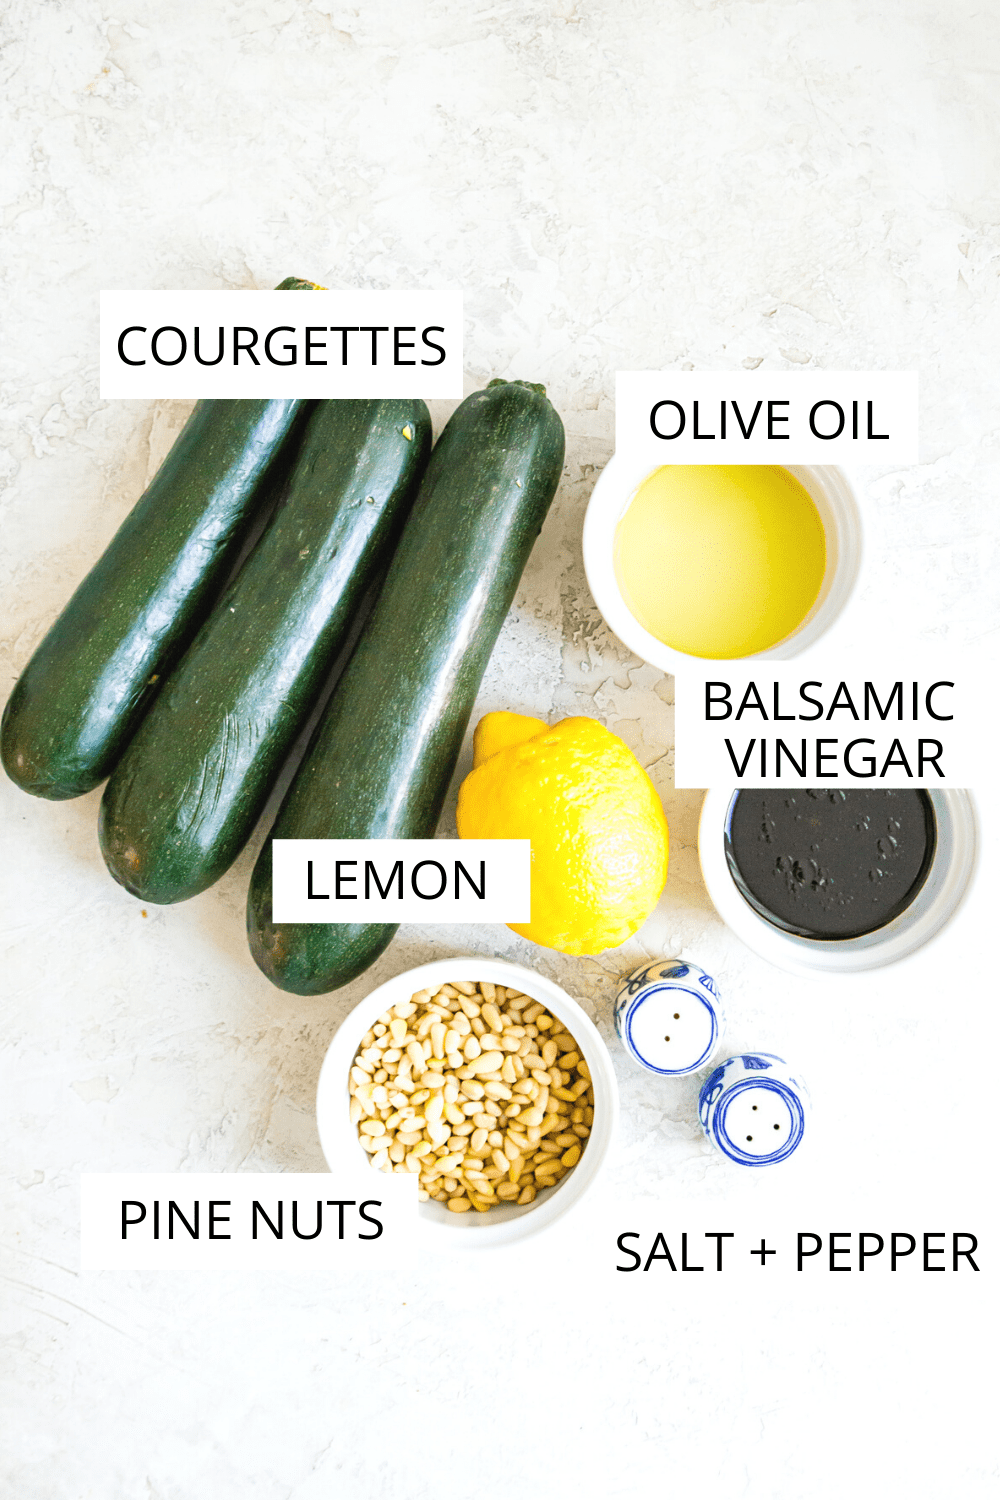 The ingredients needed for making a courgette salad including zucchinis, pine nuts, balsamic vinegar, oil and lemon.